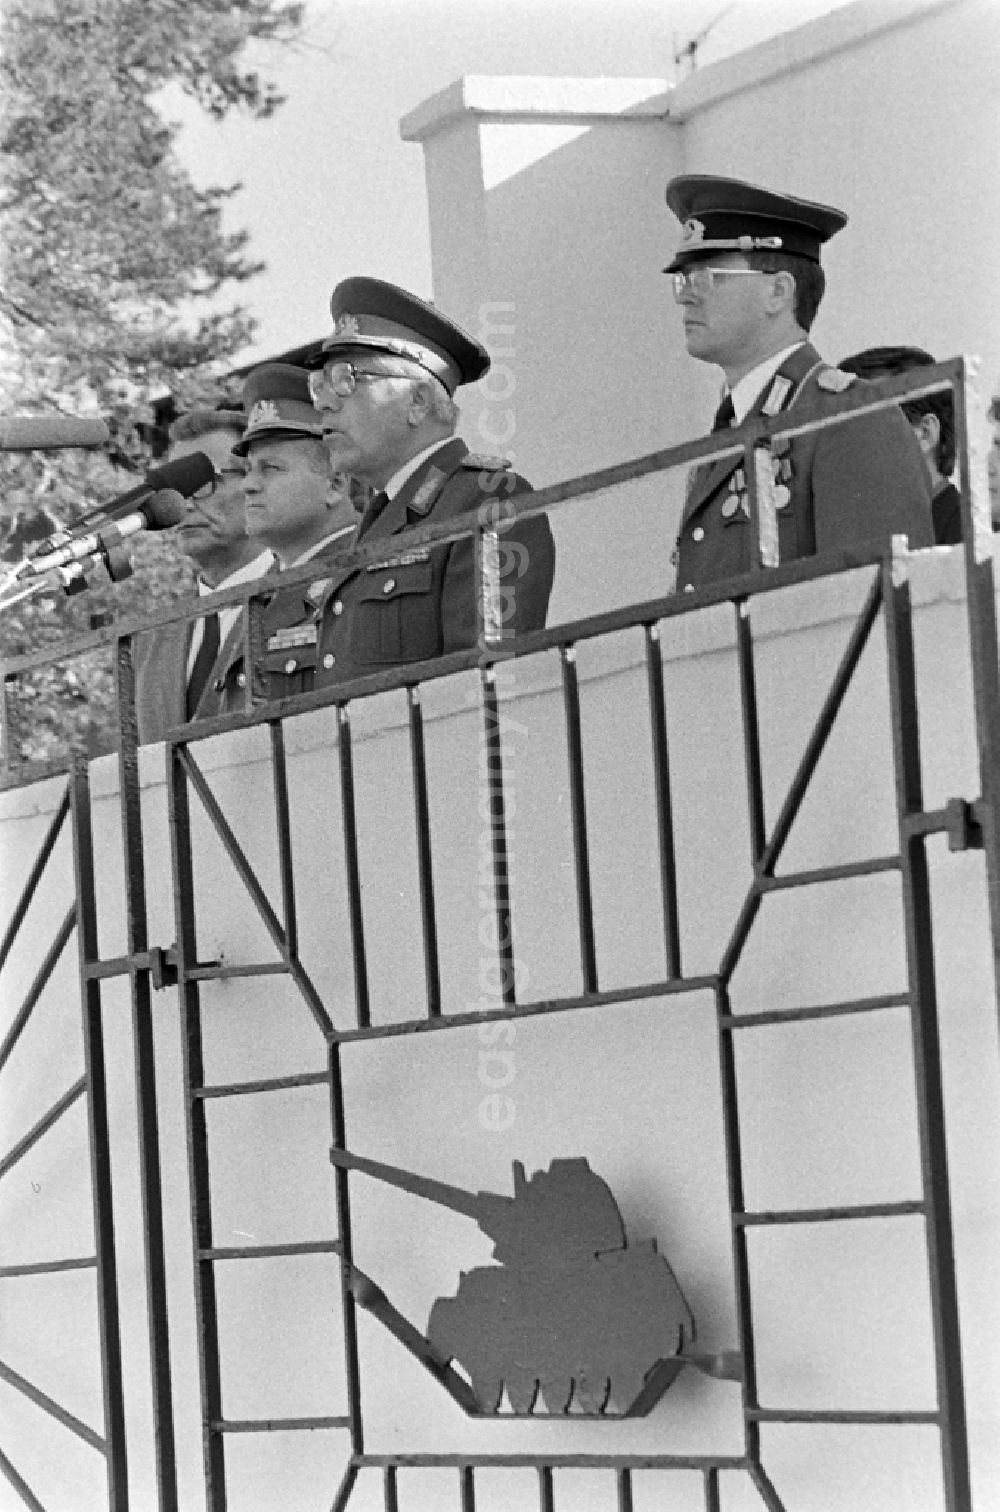 GDR picture archive: Goldberg - Honorary grandstand with Major General Horst Stechbarth and soldiers and officers of Panzer Regiment 8 (PR-8) on the occasion of the ceremonial and media-effective dissolution of the troop unit on the grounds of the Artur-Becker barracks in Goldberg in the state of Mecklenburg-Western Pomerania in the area of the former GDR, German Democratic Republic